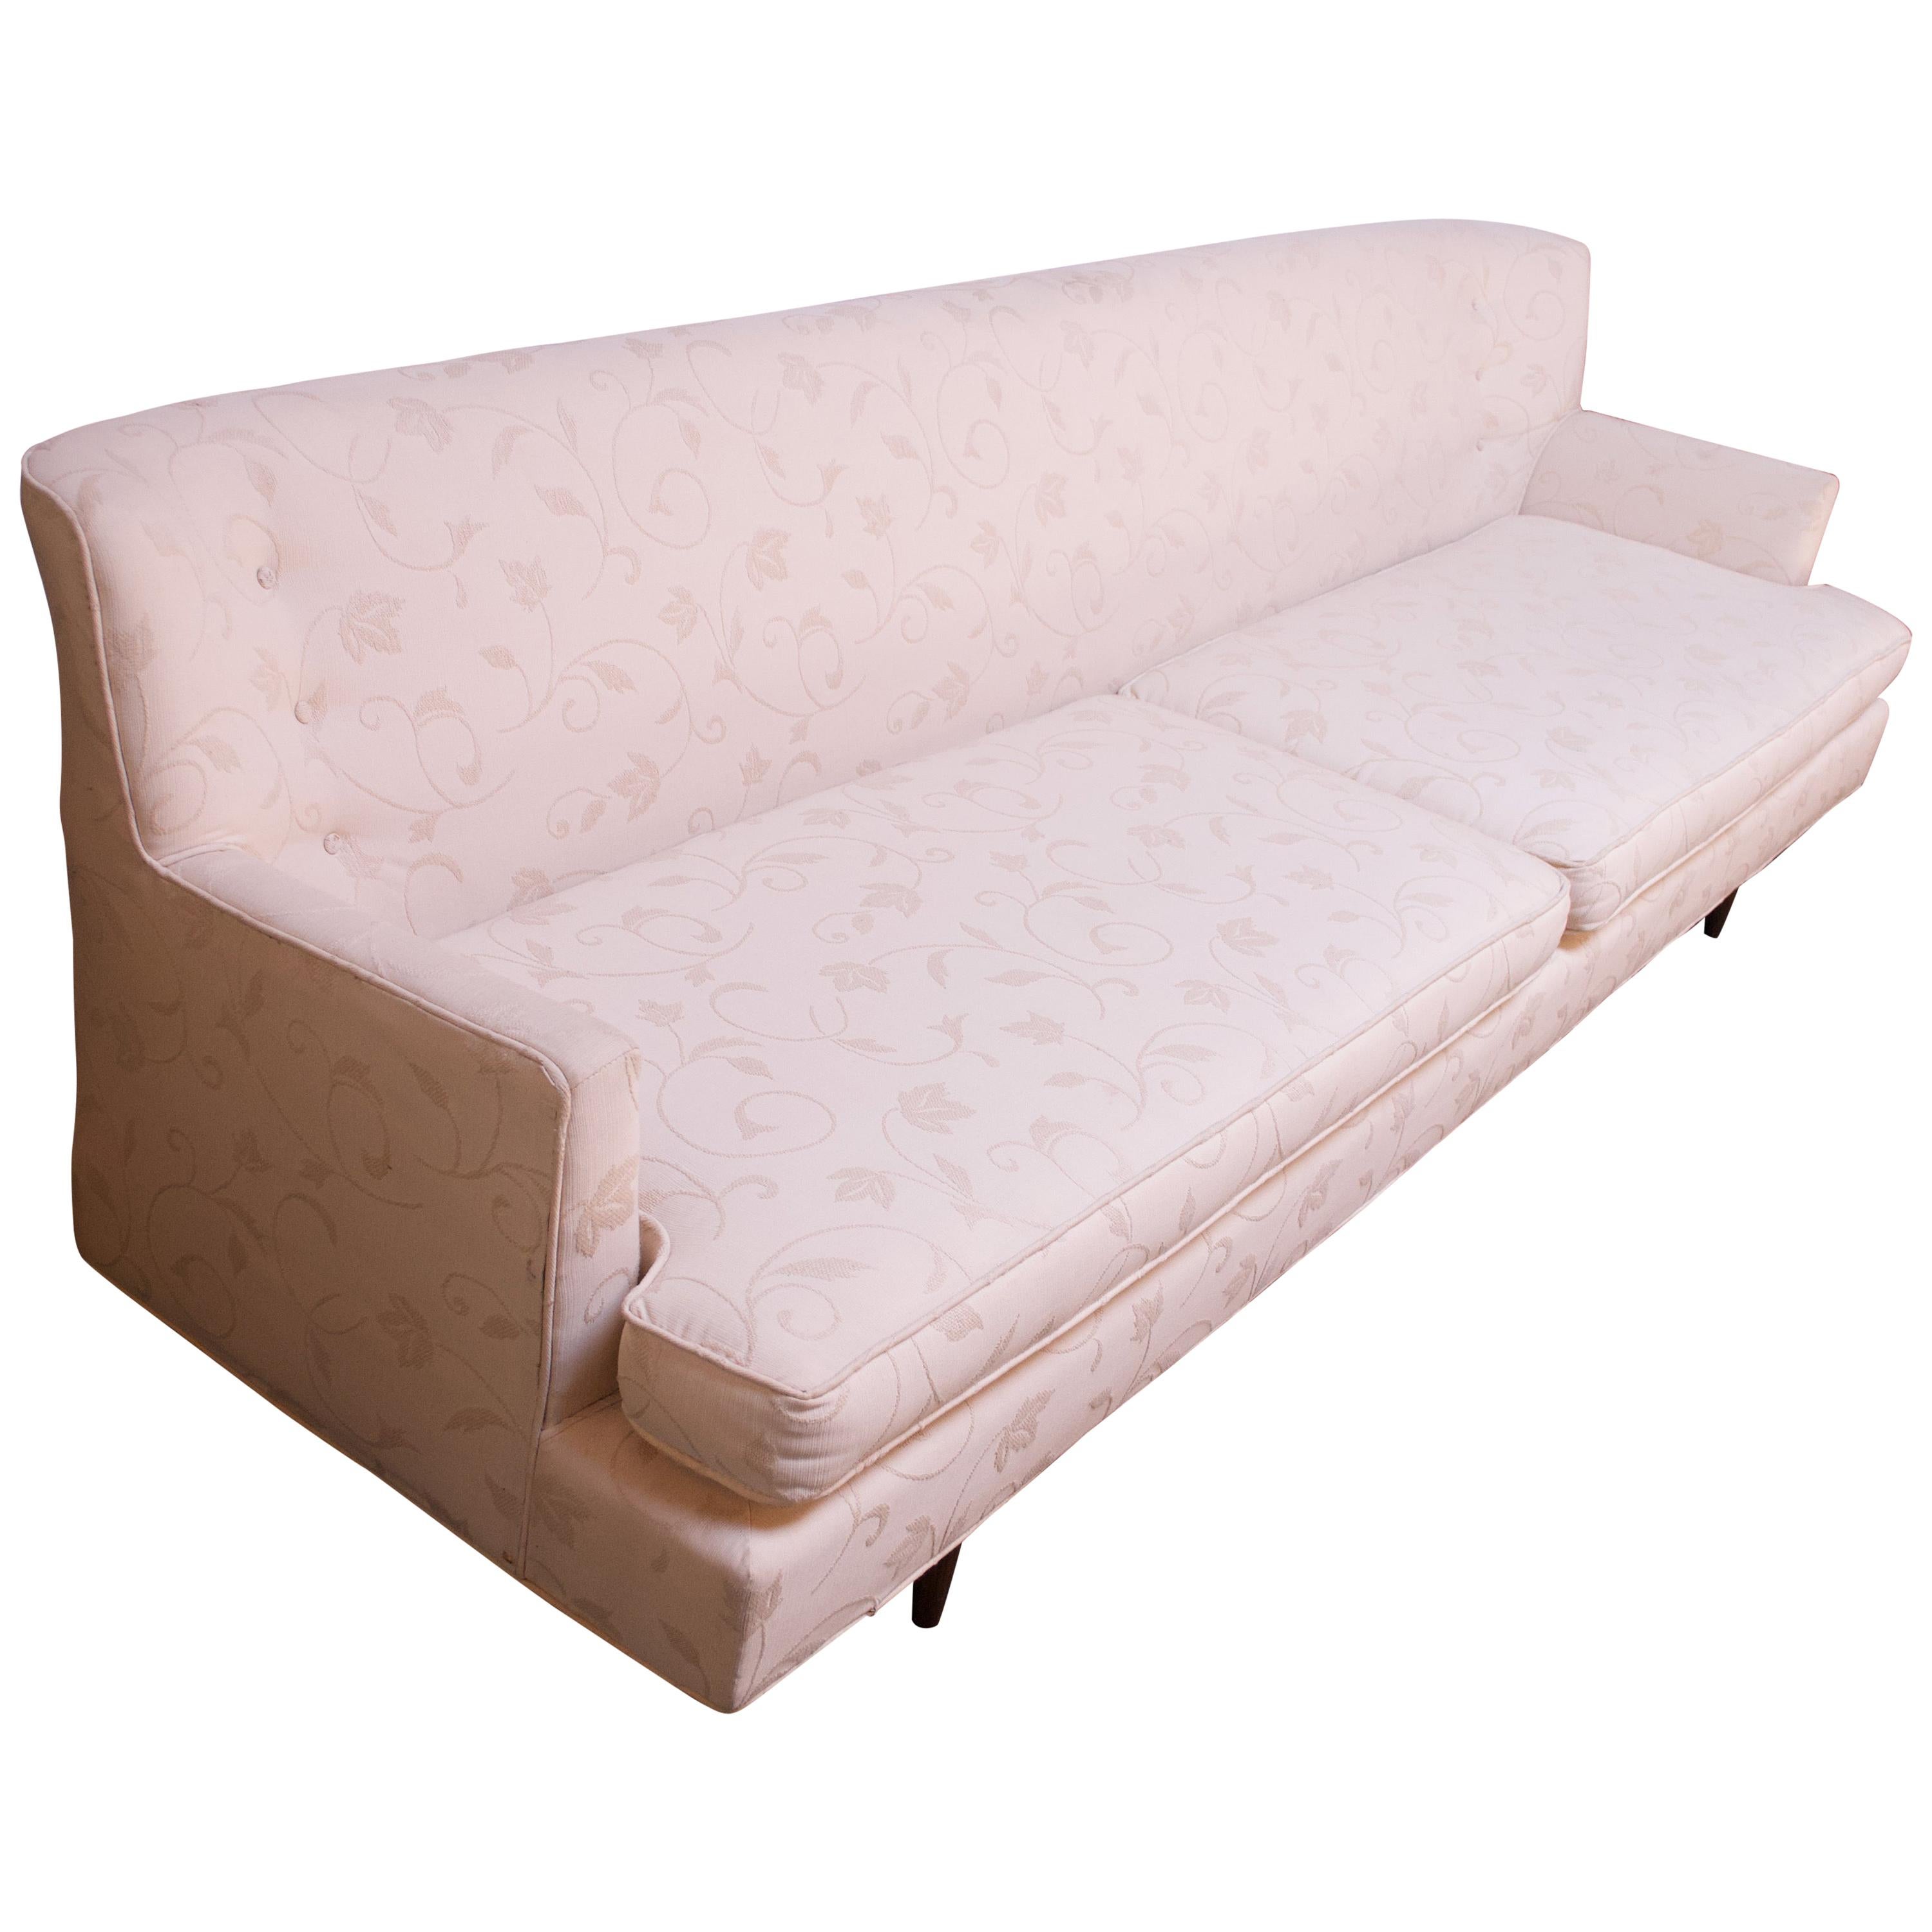 Mid-Century American Modern Embroidered Floral Sofa For Sale